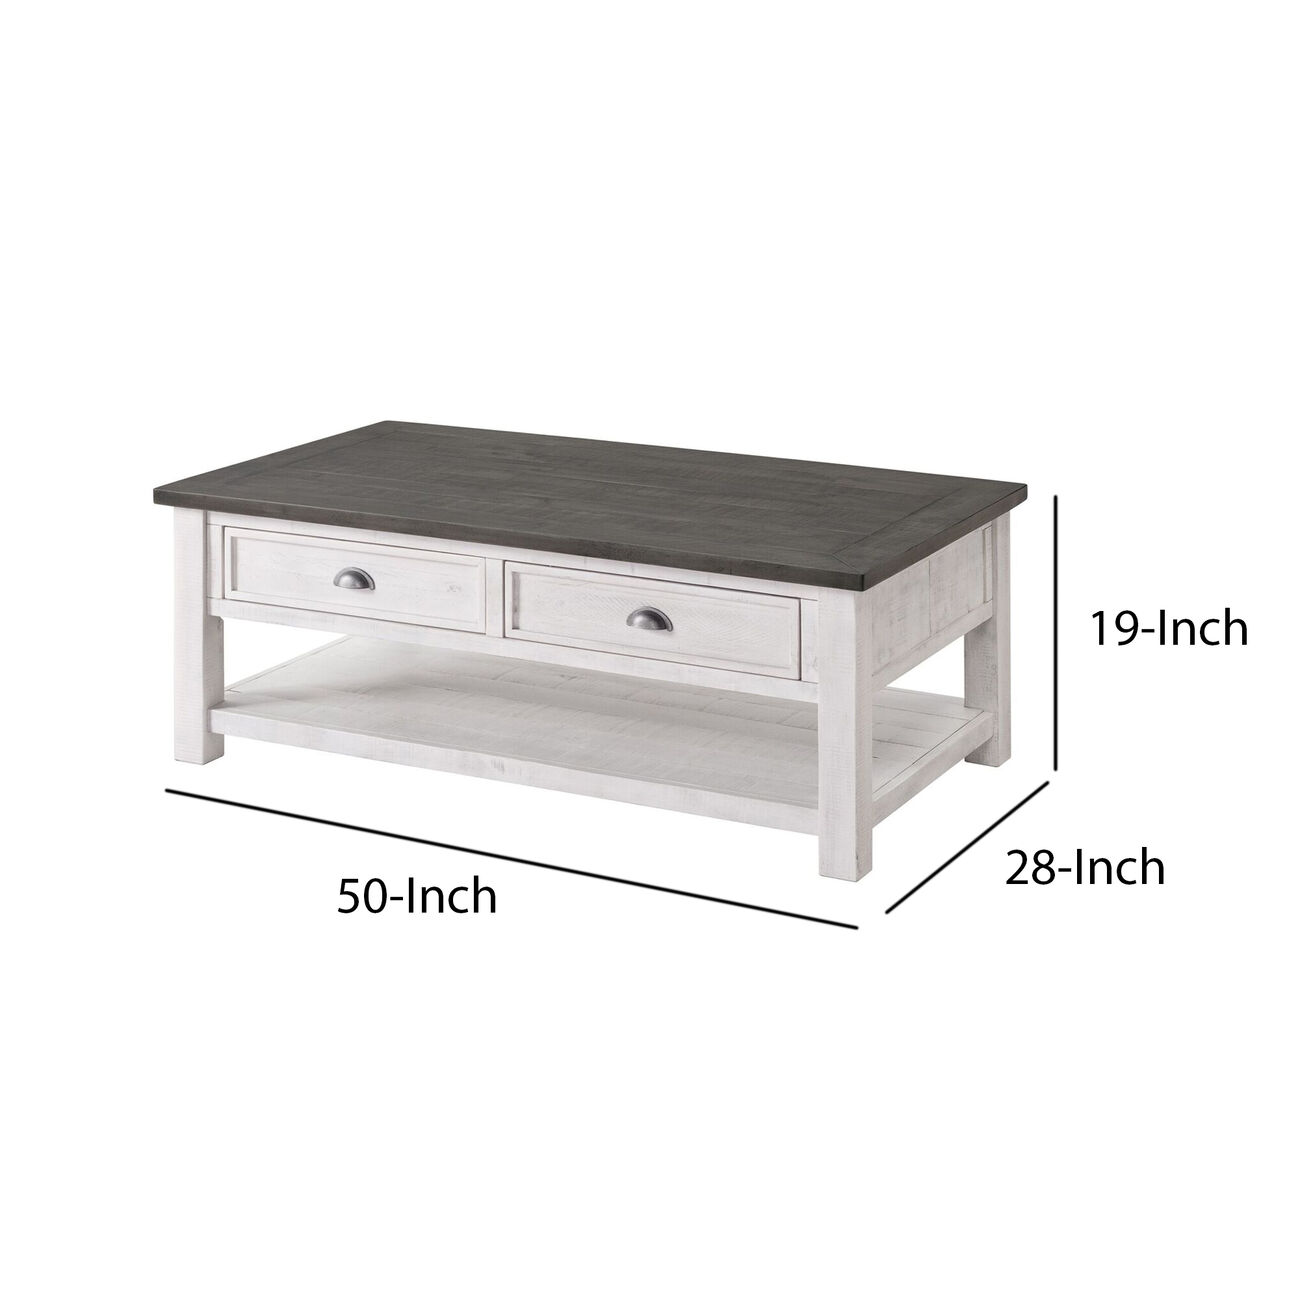 Coastal Rectangular Wooden Coffee Table with 2 Drawers, White and Gray